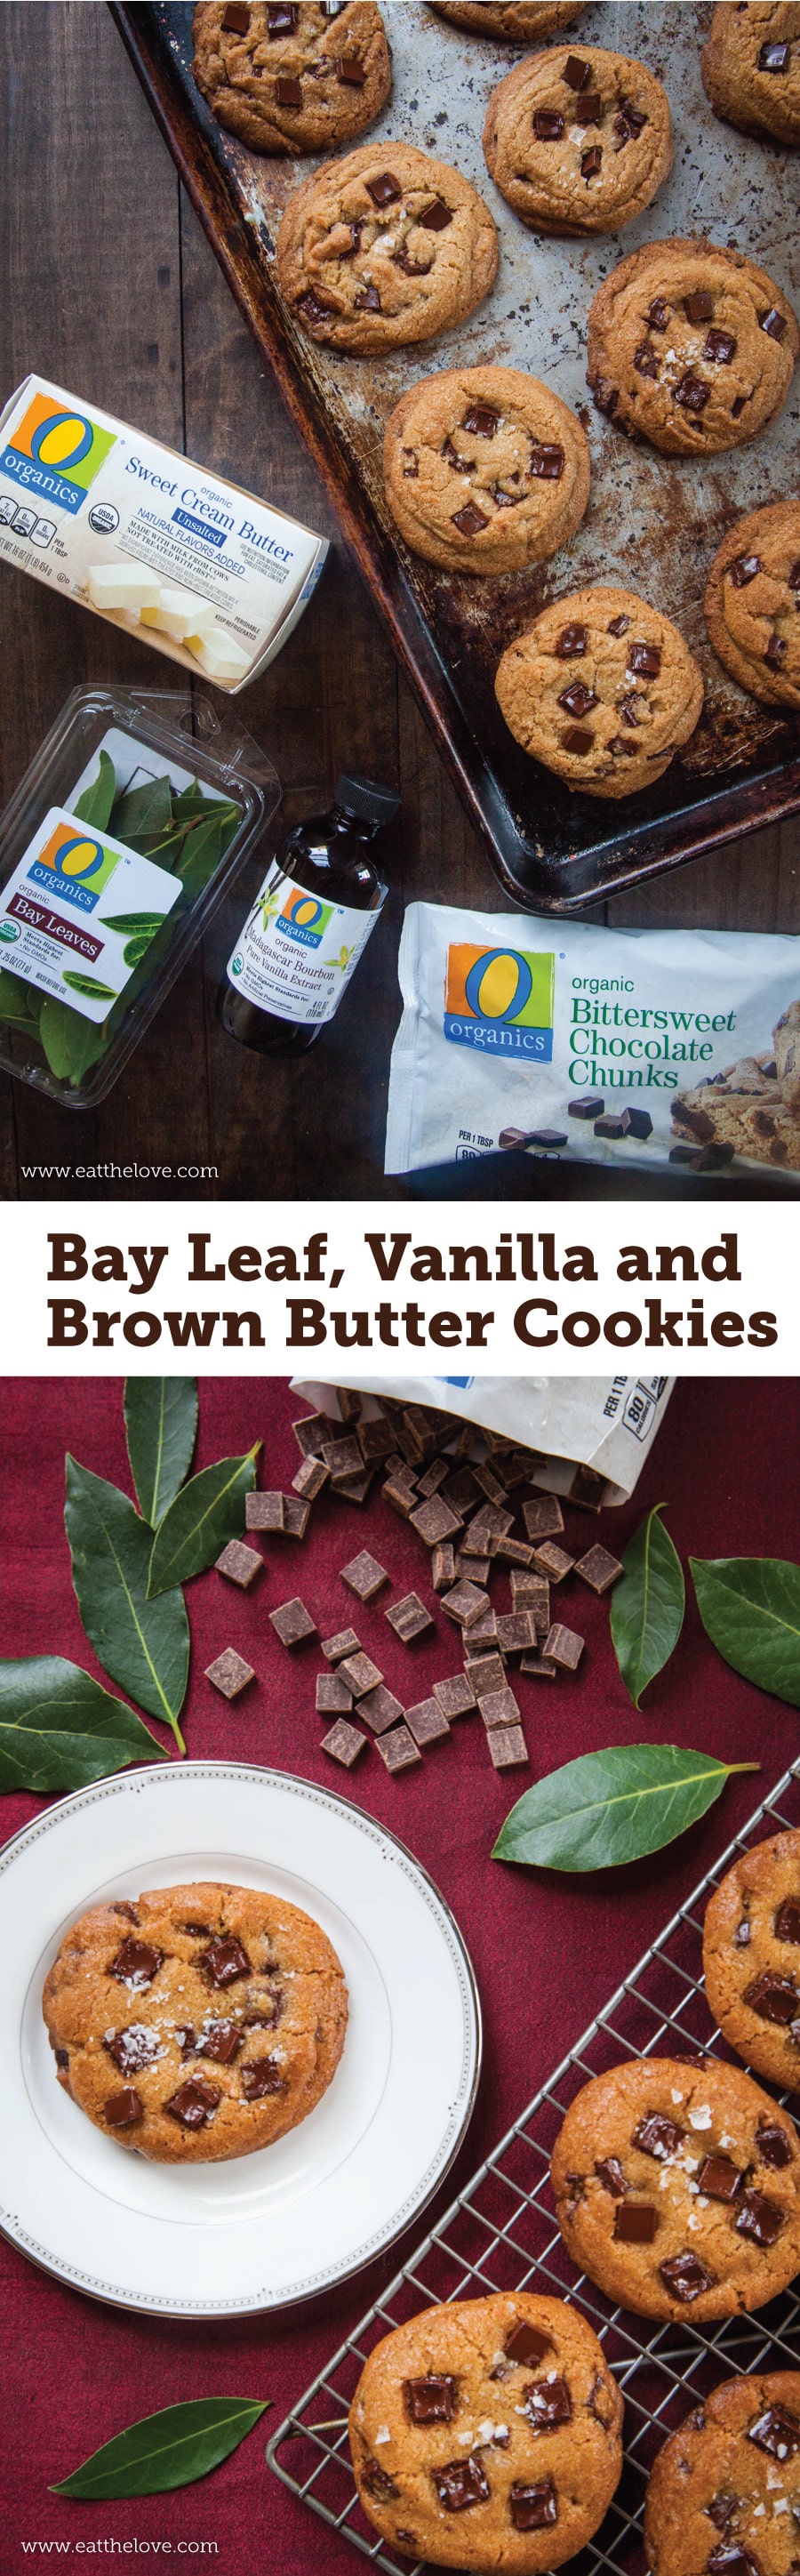 Bay Leaf, Vanilla, and Brown Butter Chocolate Chunk Cookies. Photo and recipe by Irvin Lin of Eat the Love.